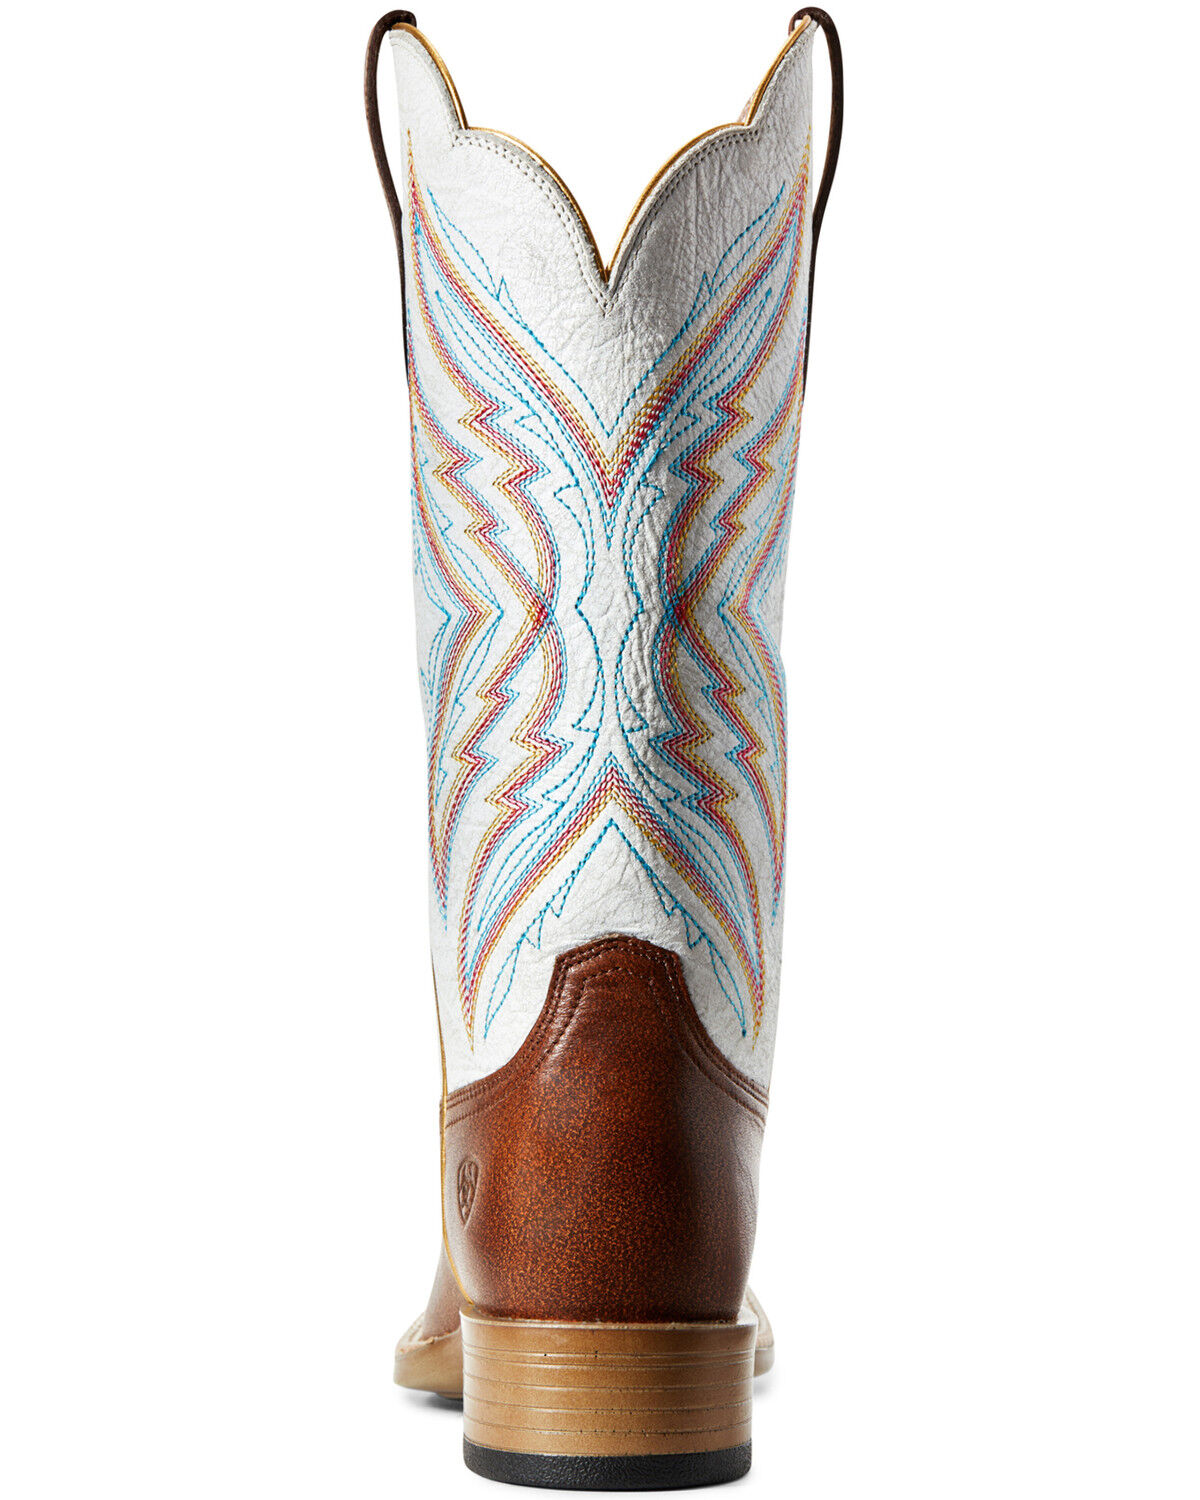 wide cowboy boots womens